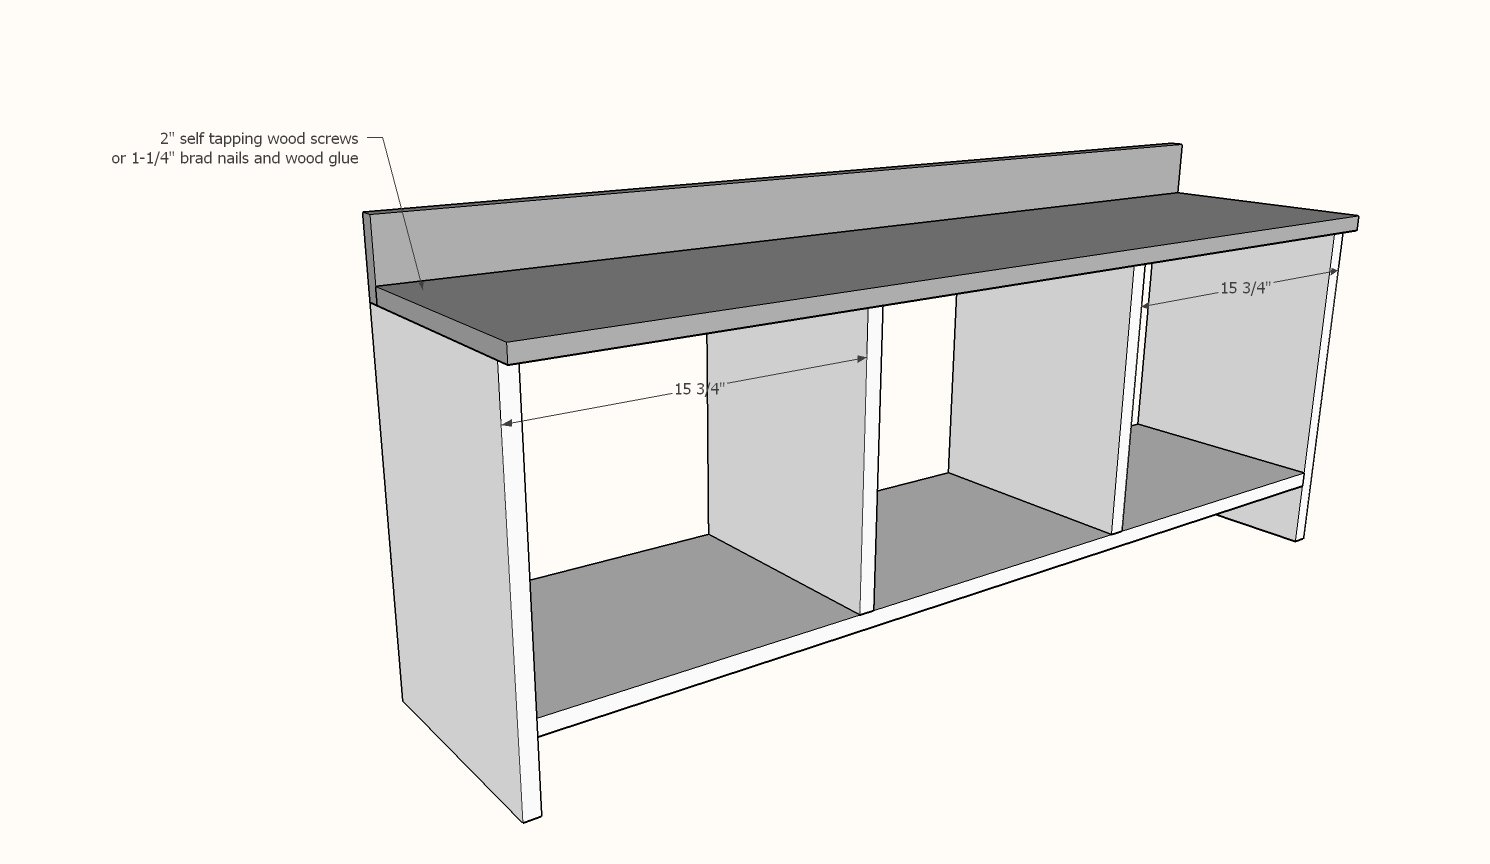 https://www.ana-white.com/sites/default/files/2019-05/entryway%20bench%20and%20shelf%20plans%20step%204_0.jpg